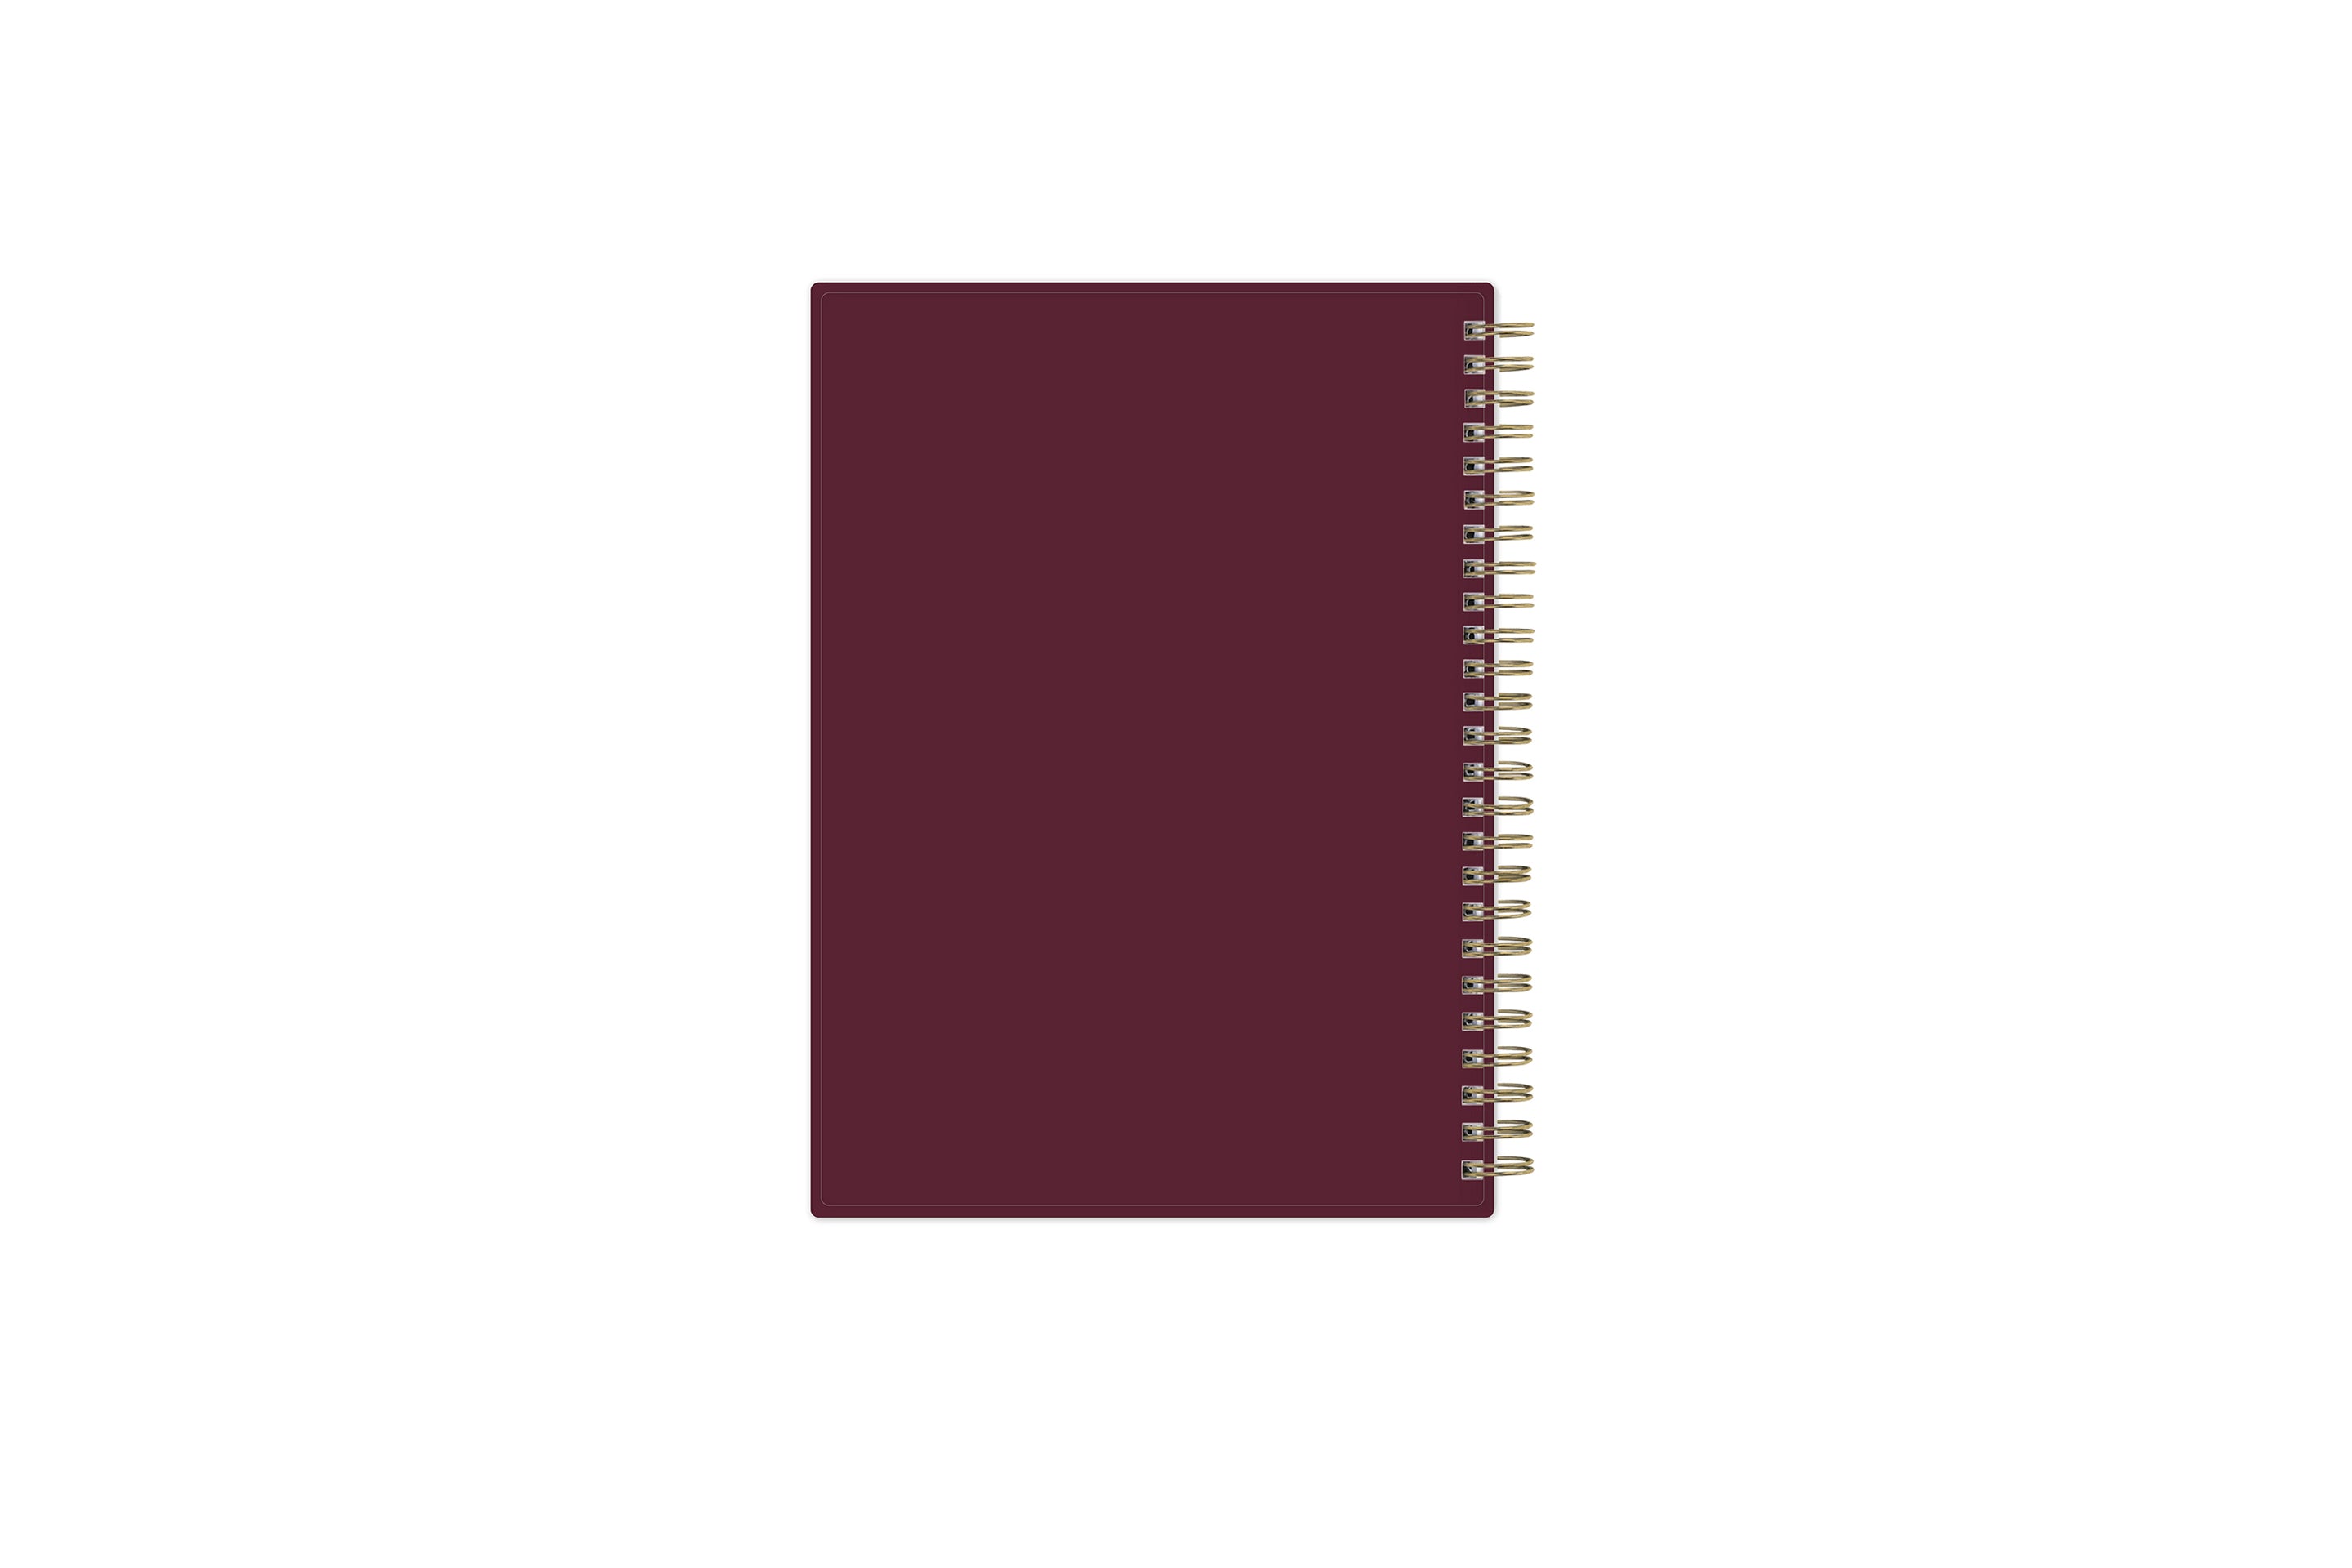 burgandy backcover gold wire-o binding 5.875x8.625